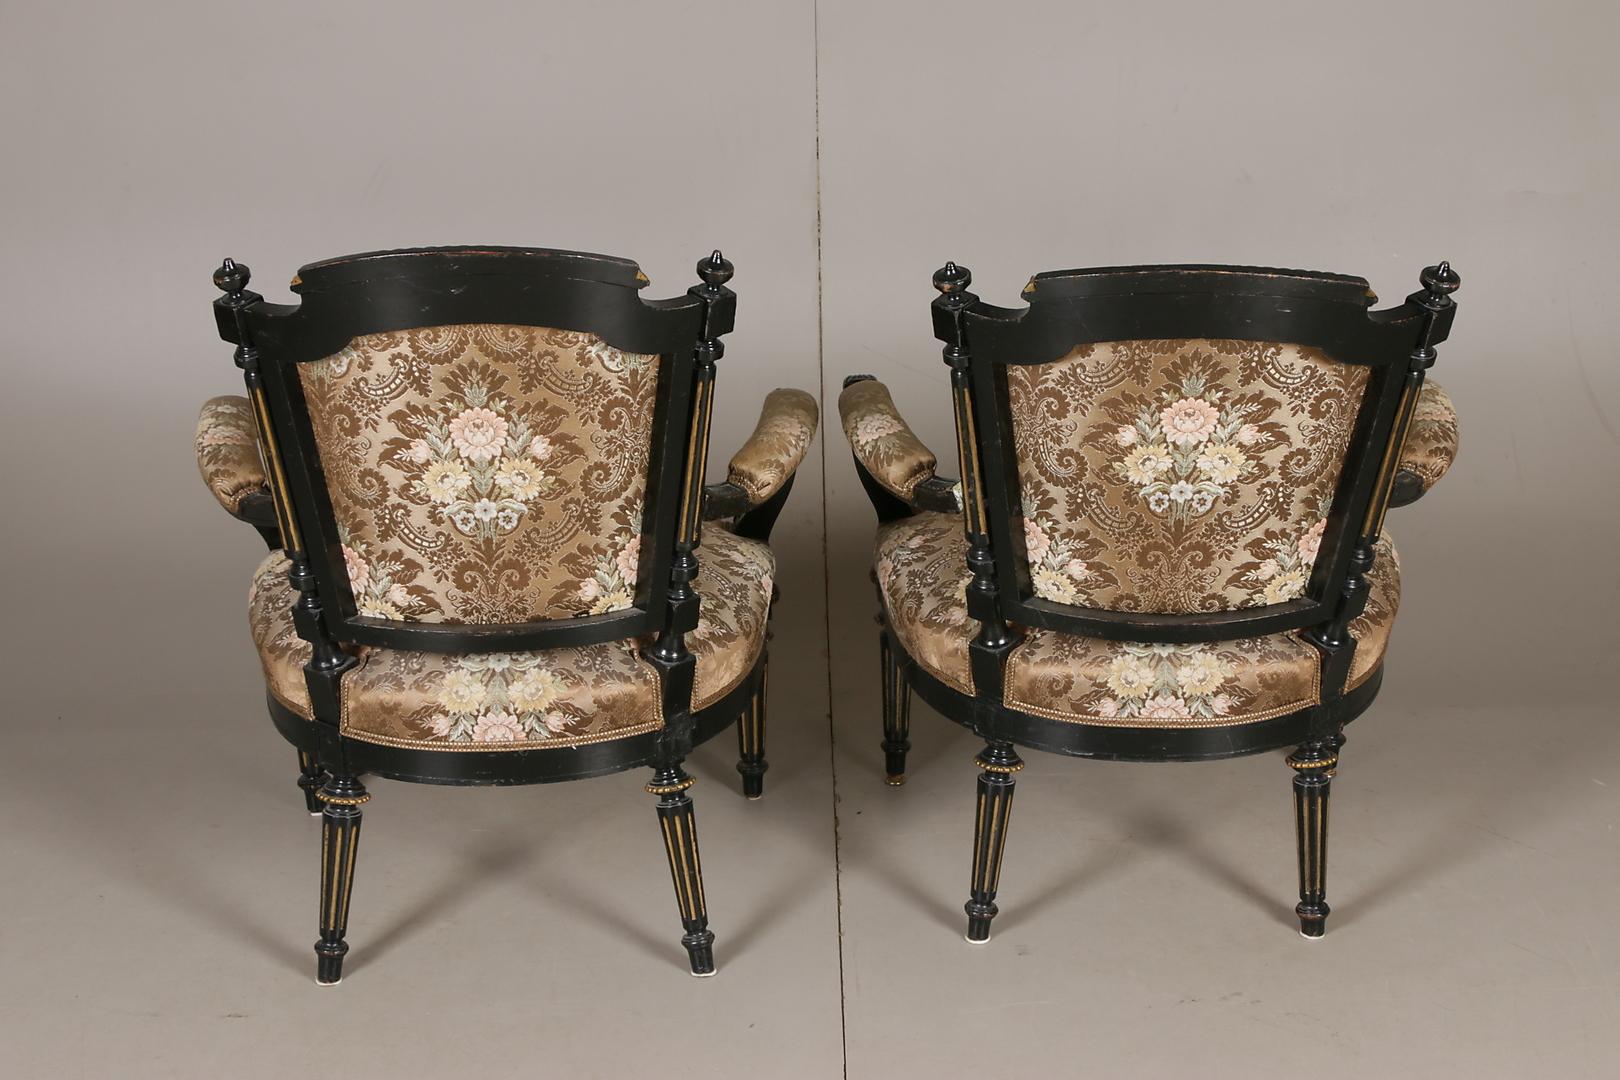 Armchairs upholstered on seat, back and armrest.
Cut and turned decor, partly gilded, backrest with foliage decoration
Backrest height 87, seat height 38.5, seat depth 52 and width 69 cm.